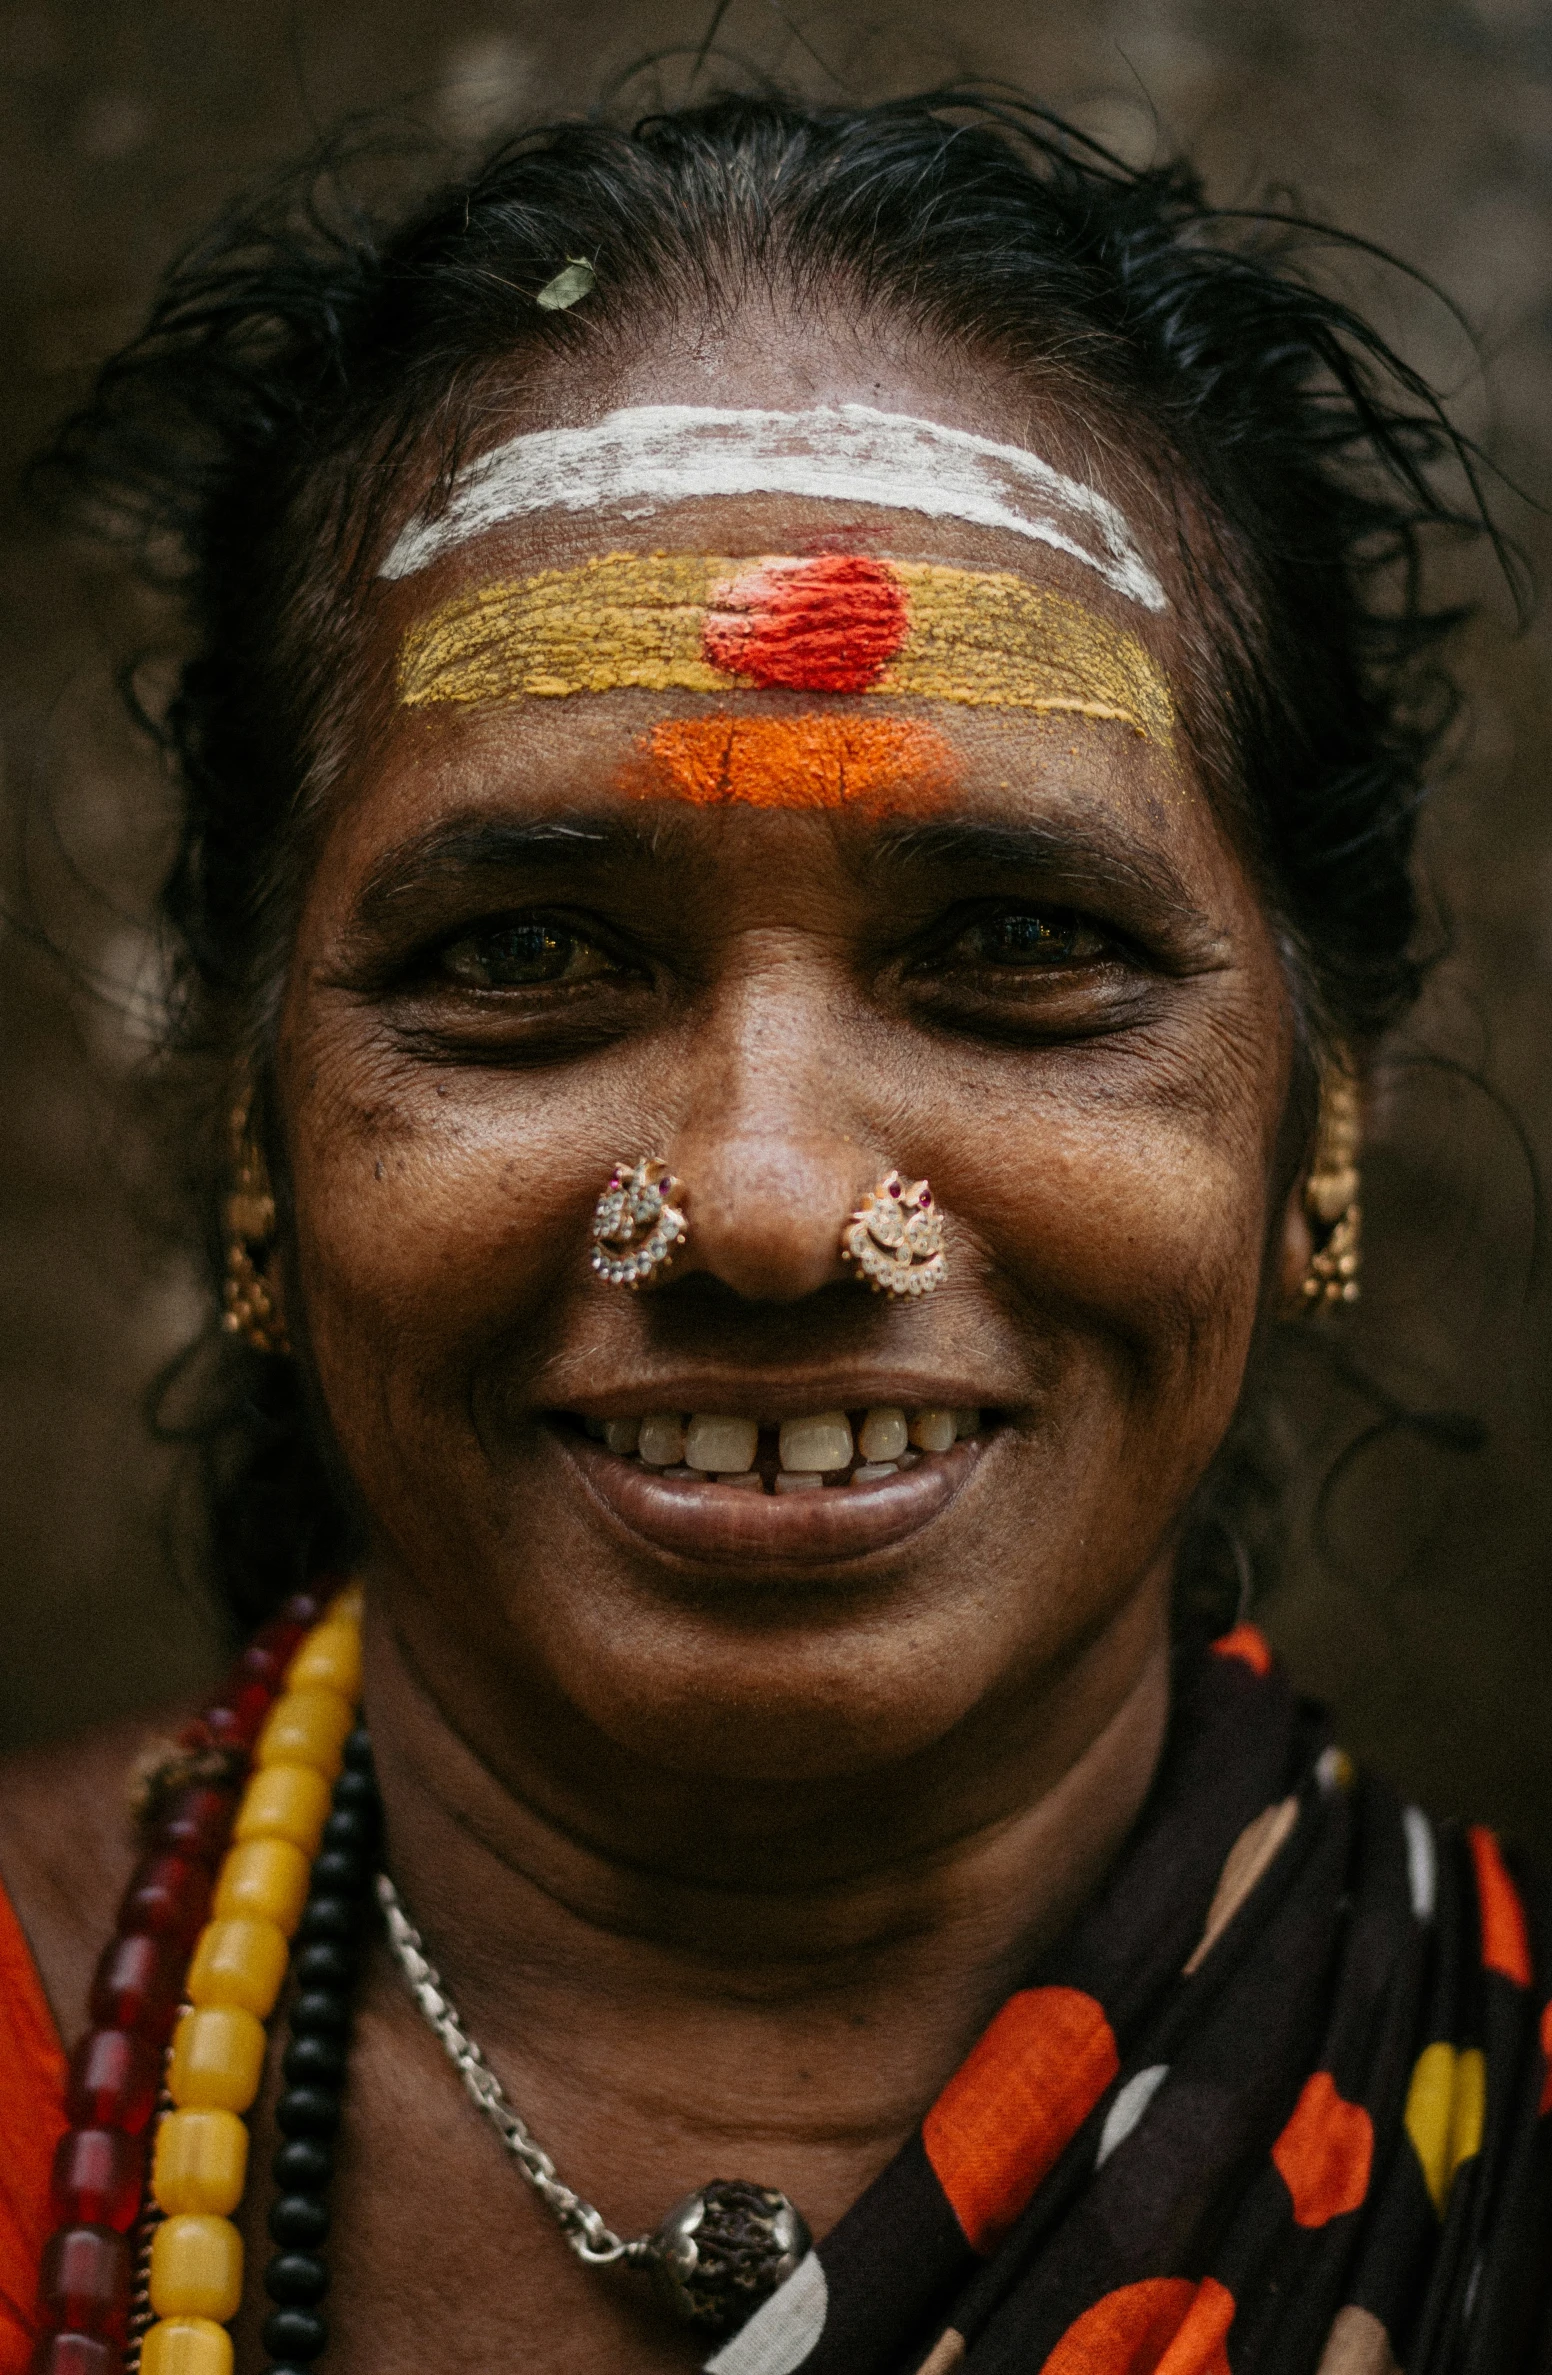 an indian woman with painted face and colorful accessories